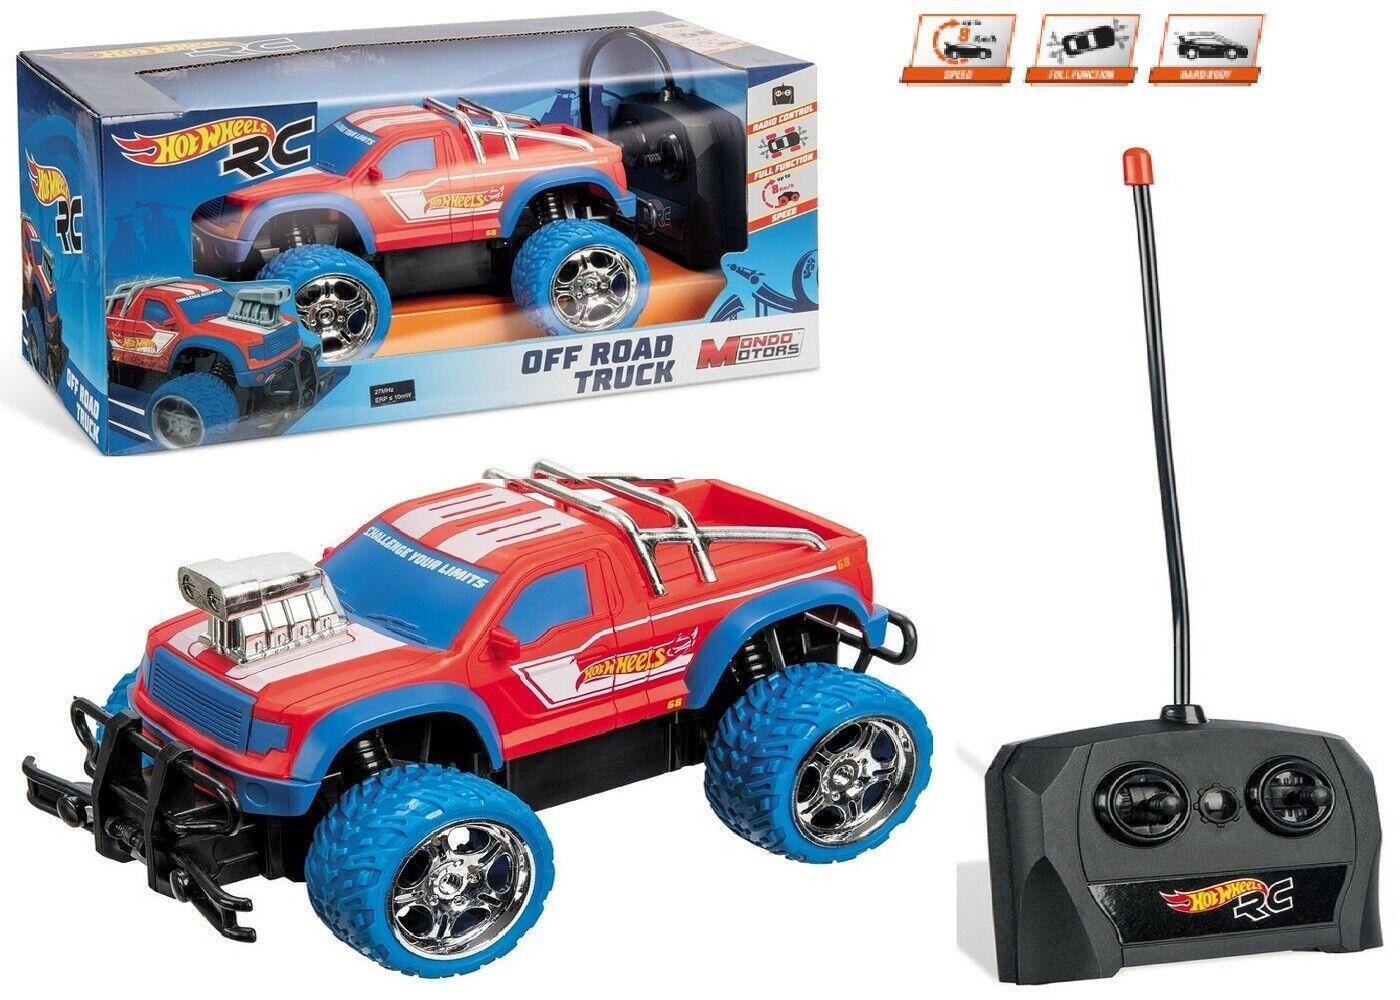 Hot Wheels RC Off Road Truck Ages 3+ New Toy Remote Control Car Fun Boys Play